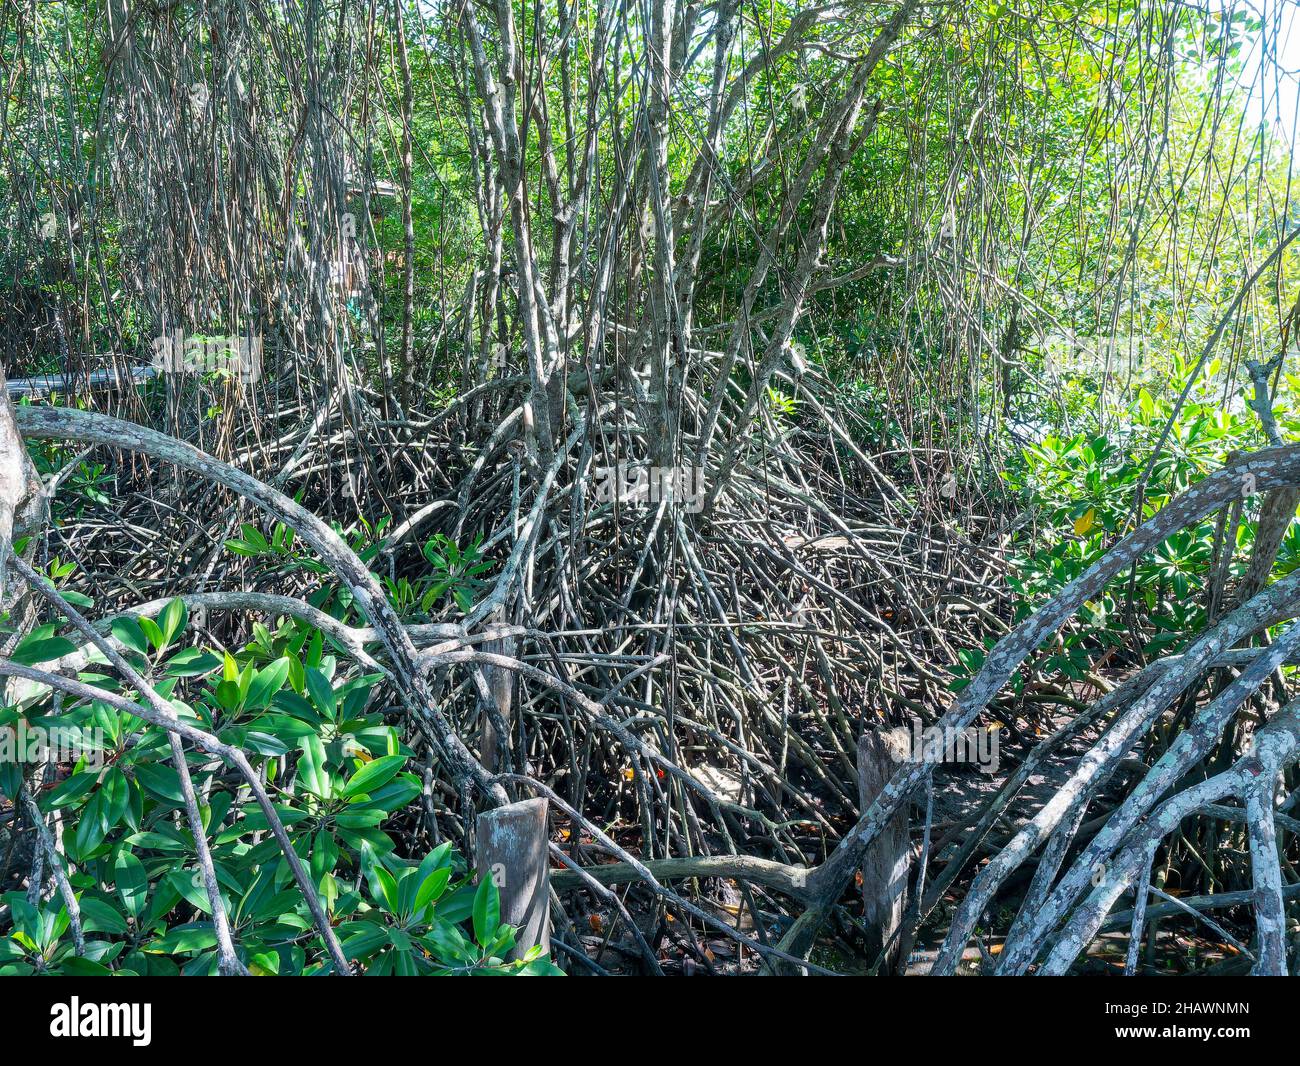 Mangrove forest in the Surat Thani province of Thailand. Stock Photo